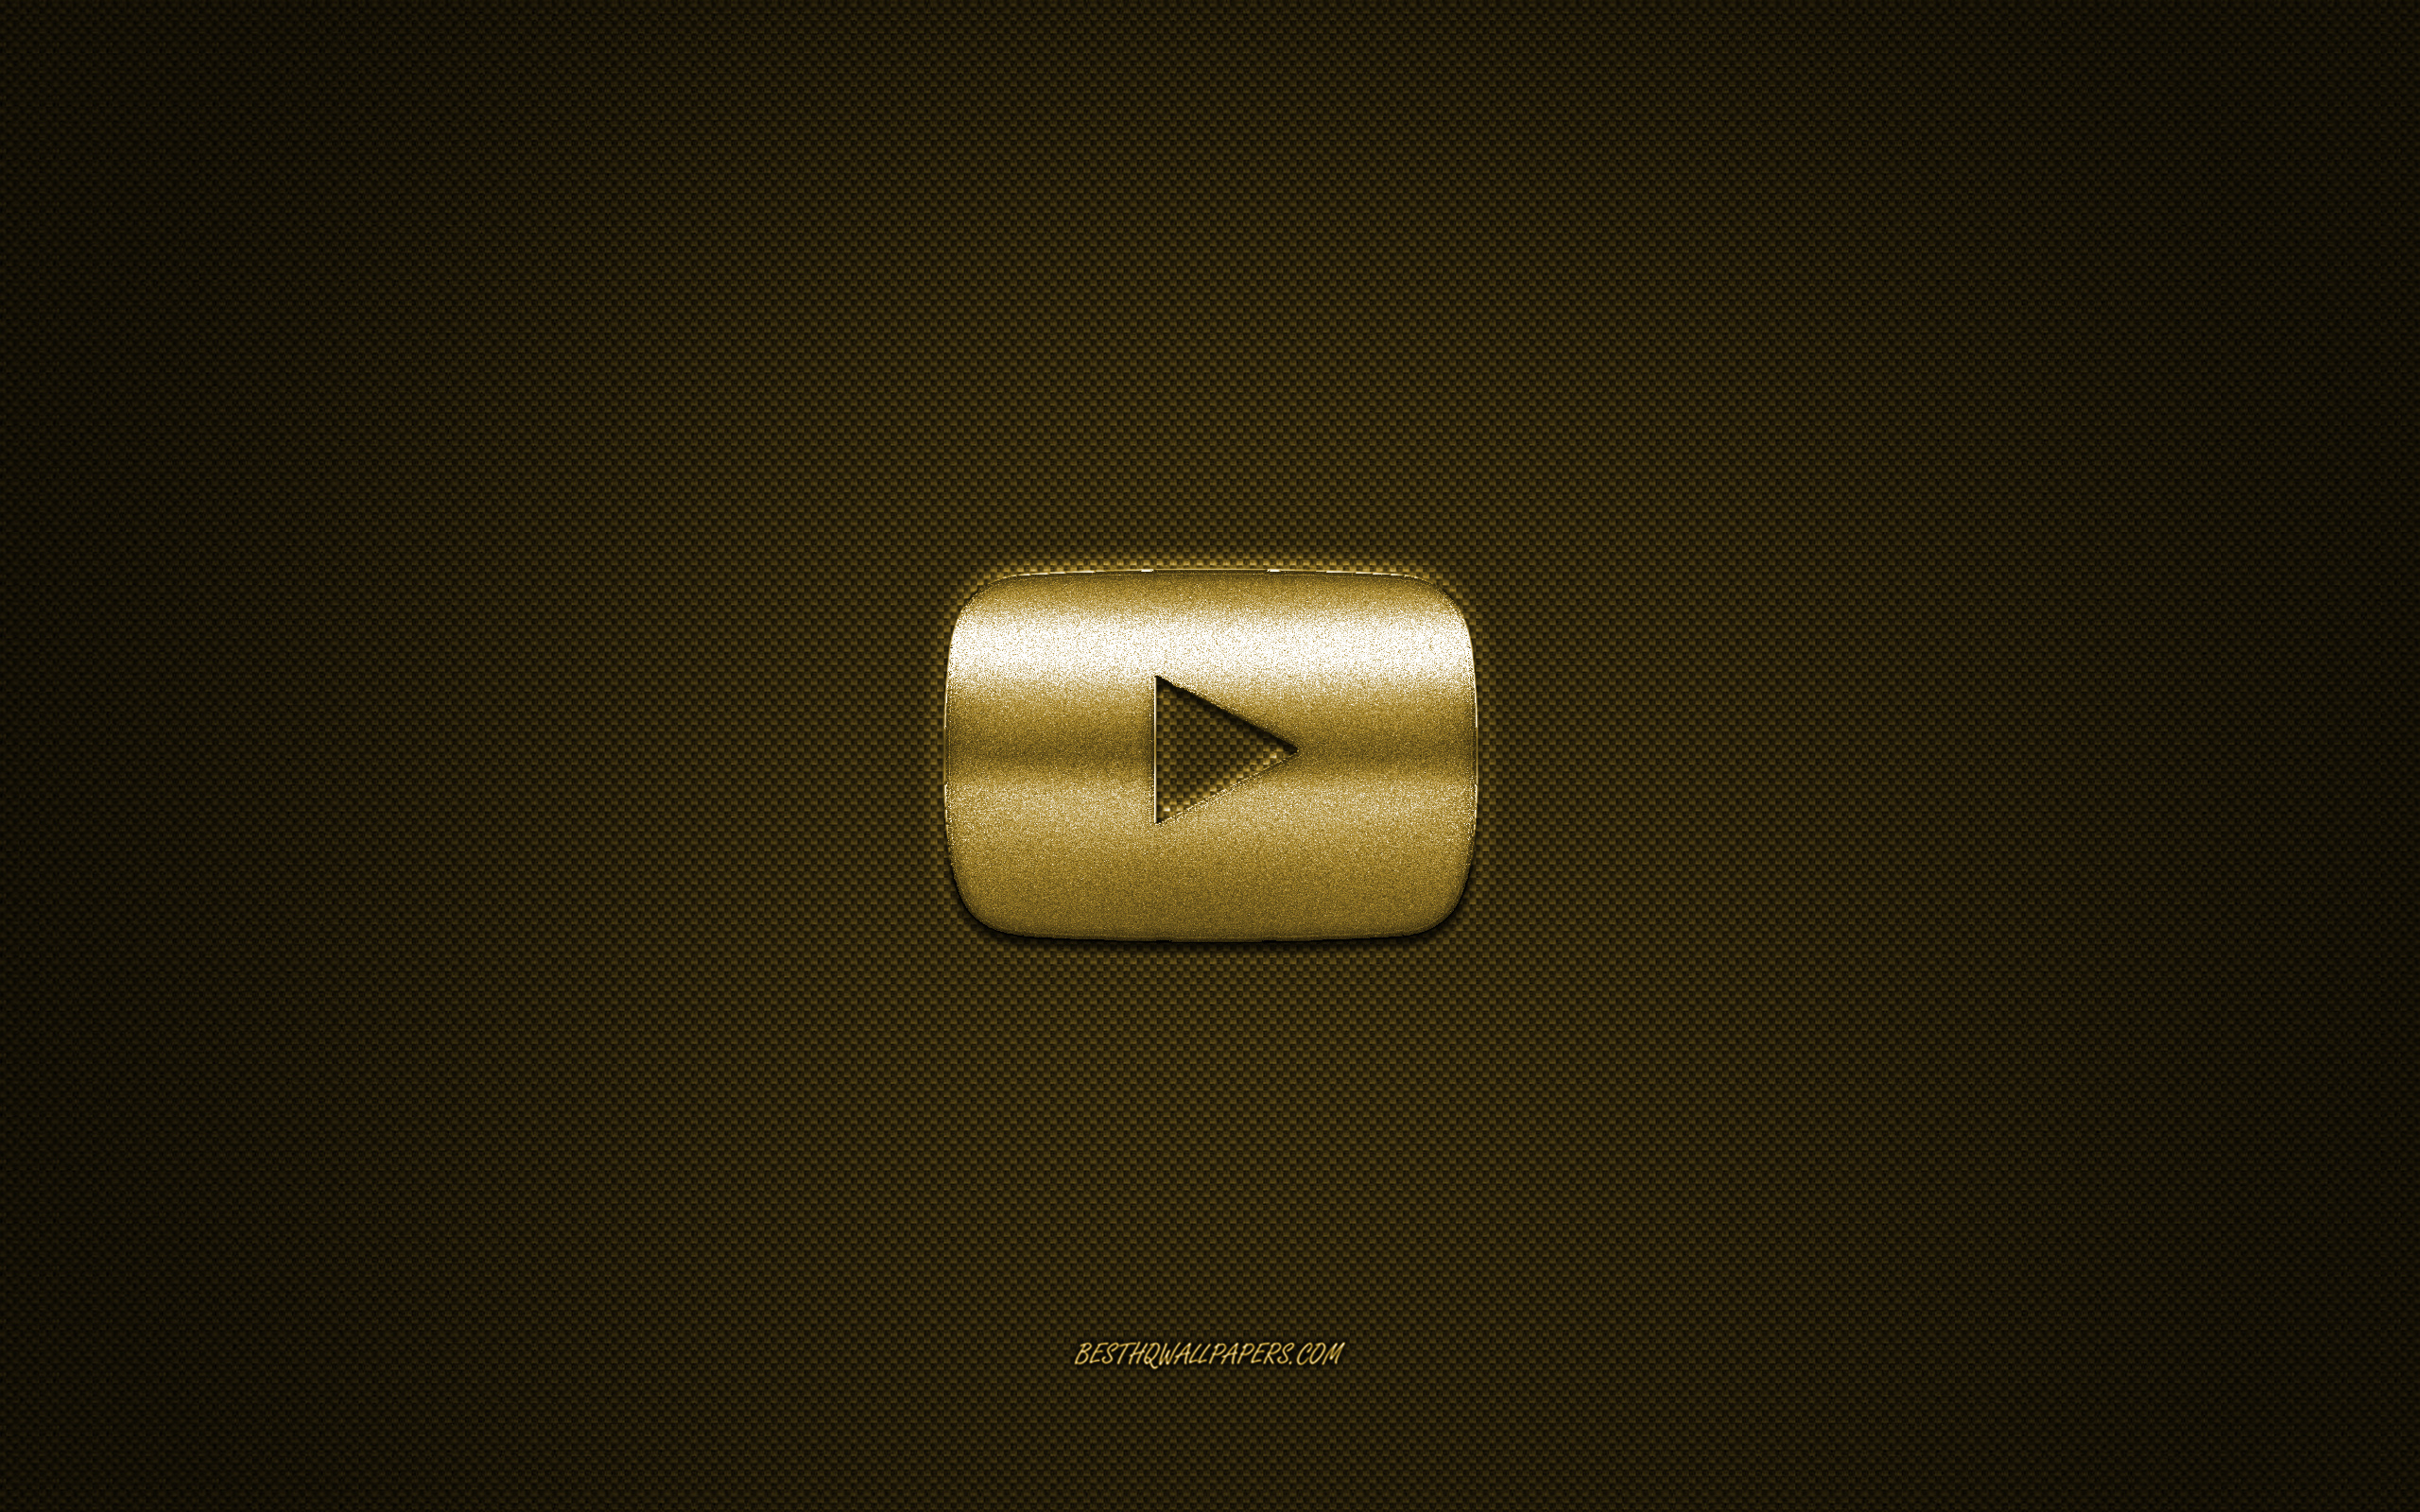 Download wallpaper YouTube logo, golden shiny logo, YouTube metal emblem, YouTube golden button, golden carbon fiber texture, YouTube, brands, creative art for desktop with resolution 2560x1600. High Quality HD picture wallpaper